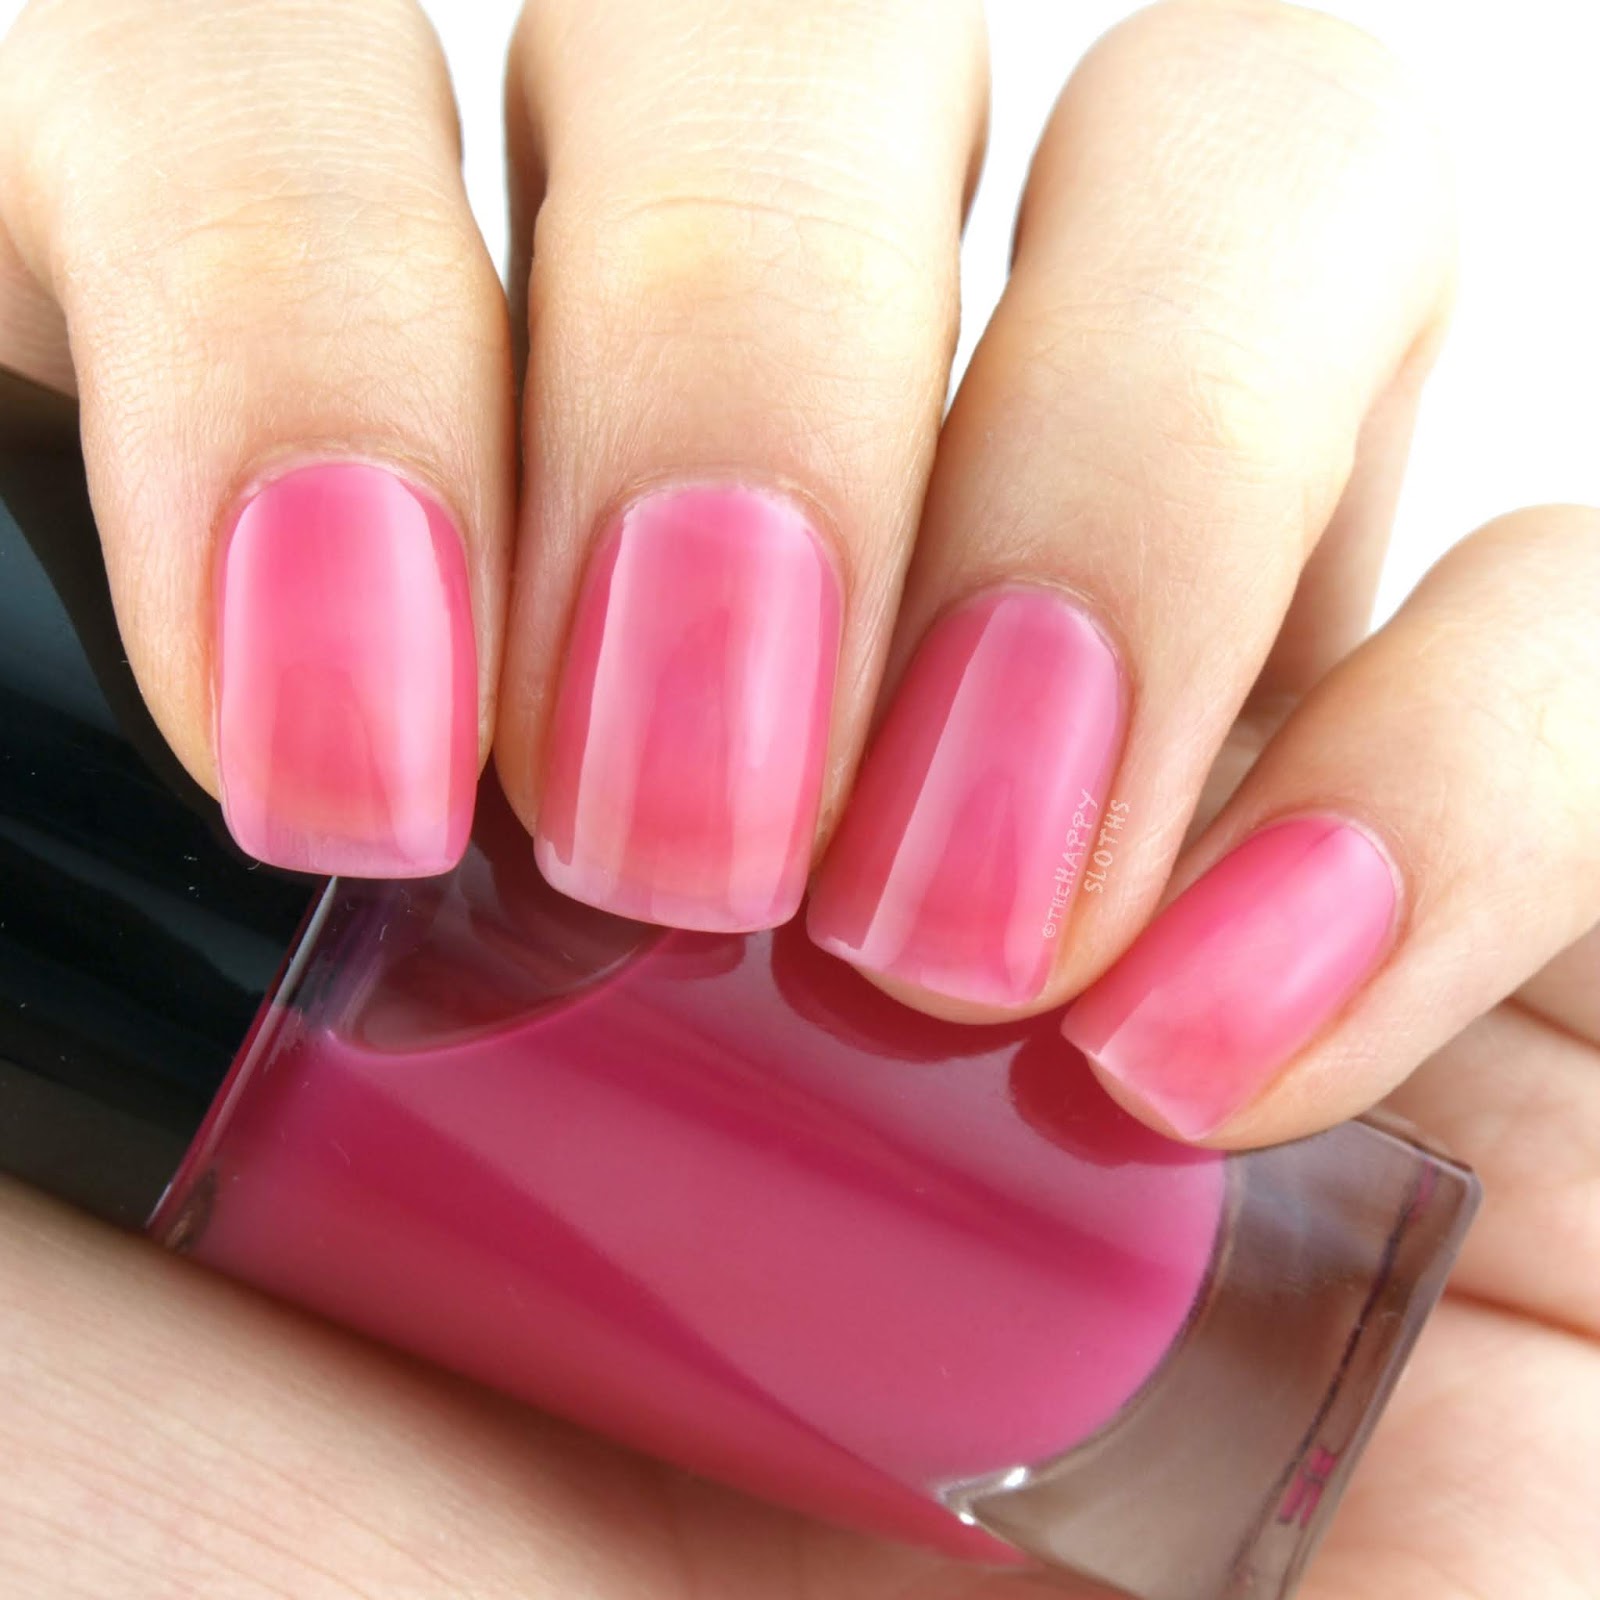 Lancome x Proenza Schouler | Le Vernis Nail Polish in "356 Pink Chroma": Review and Swatches